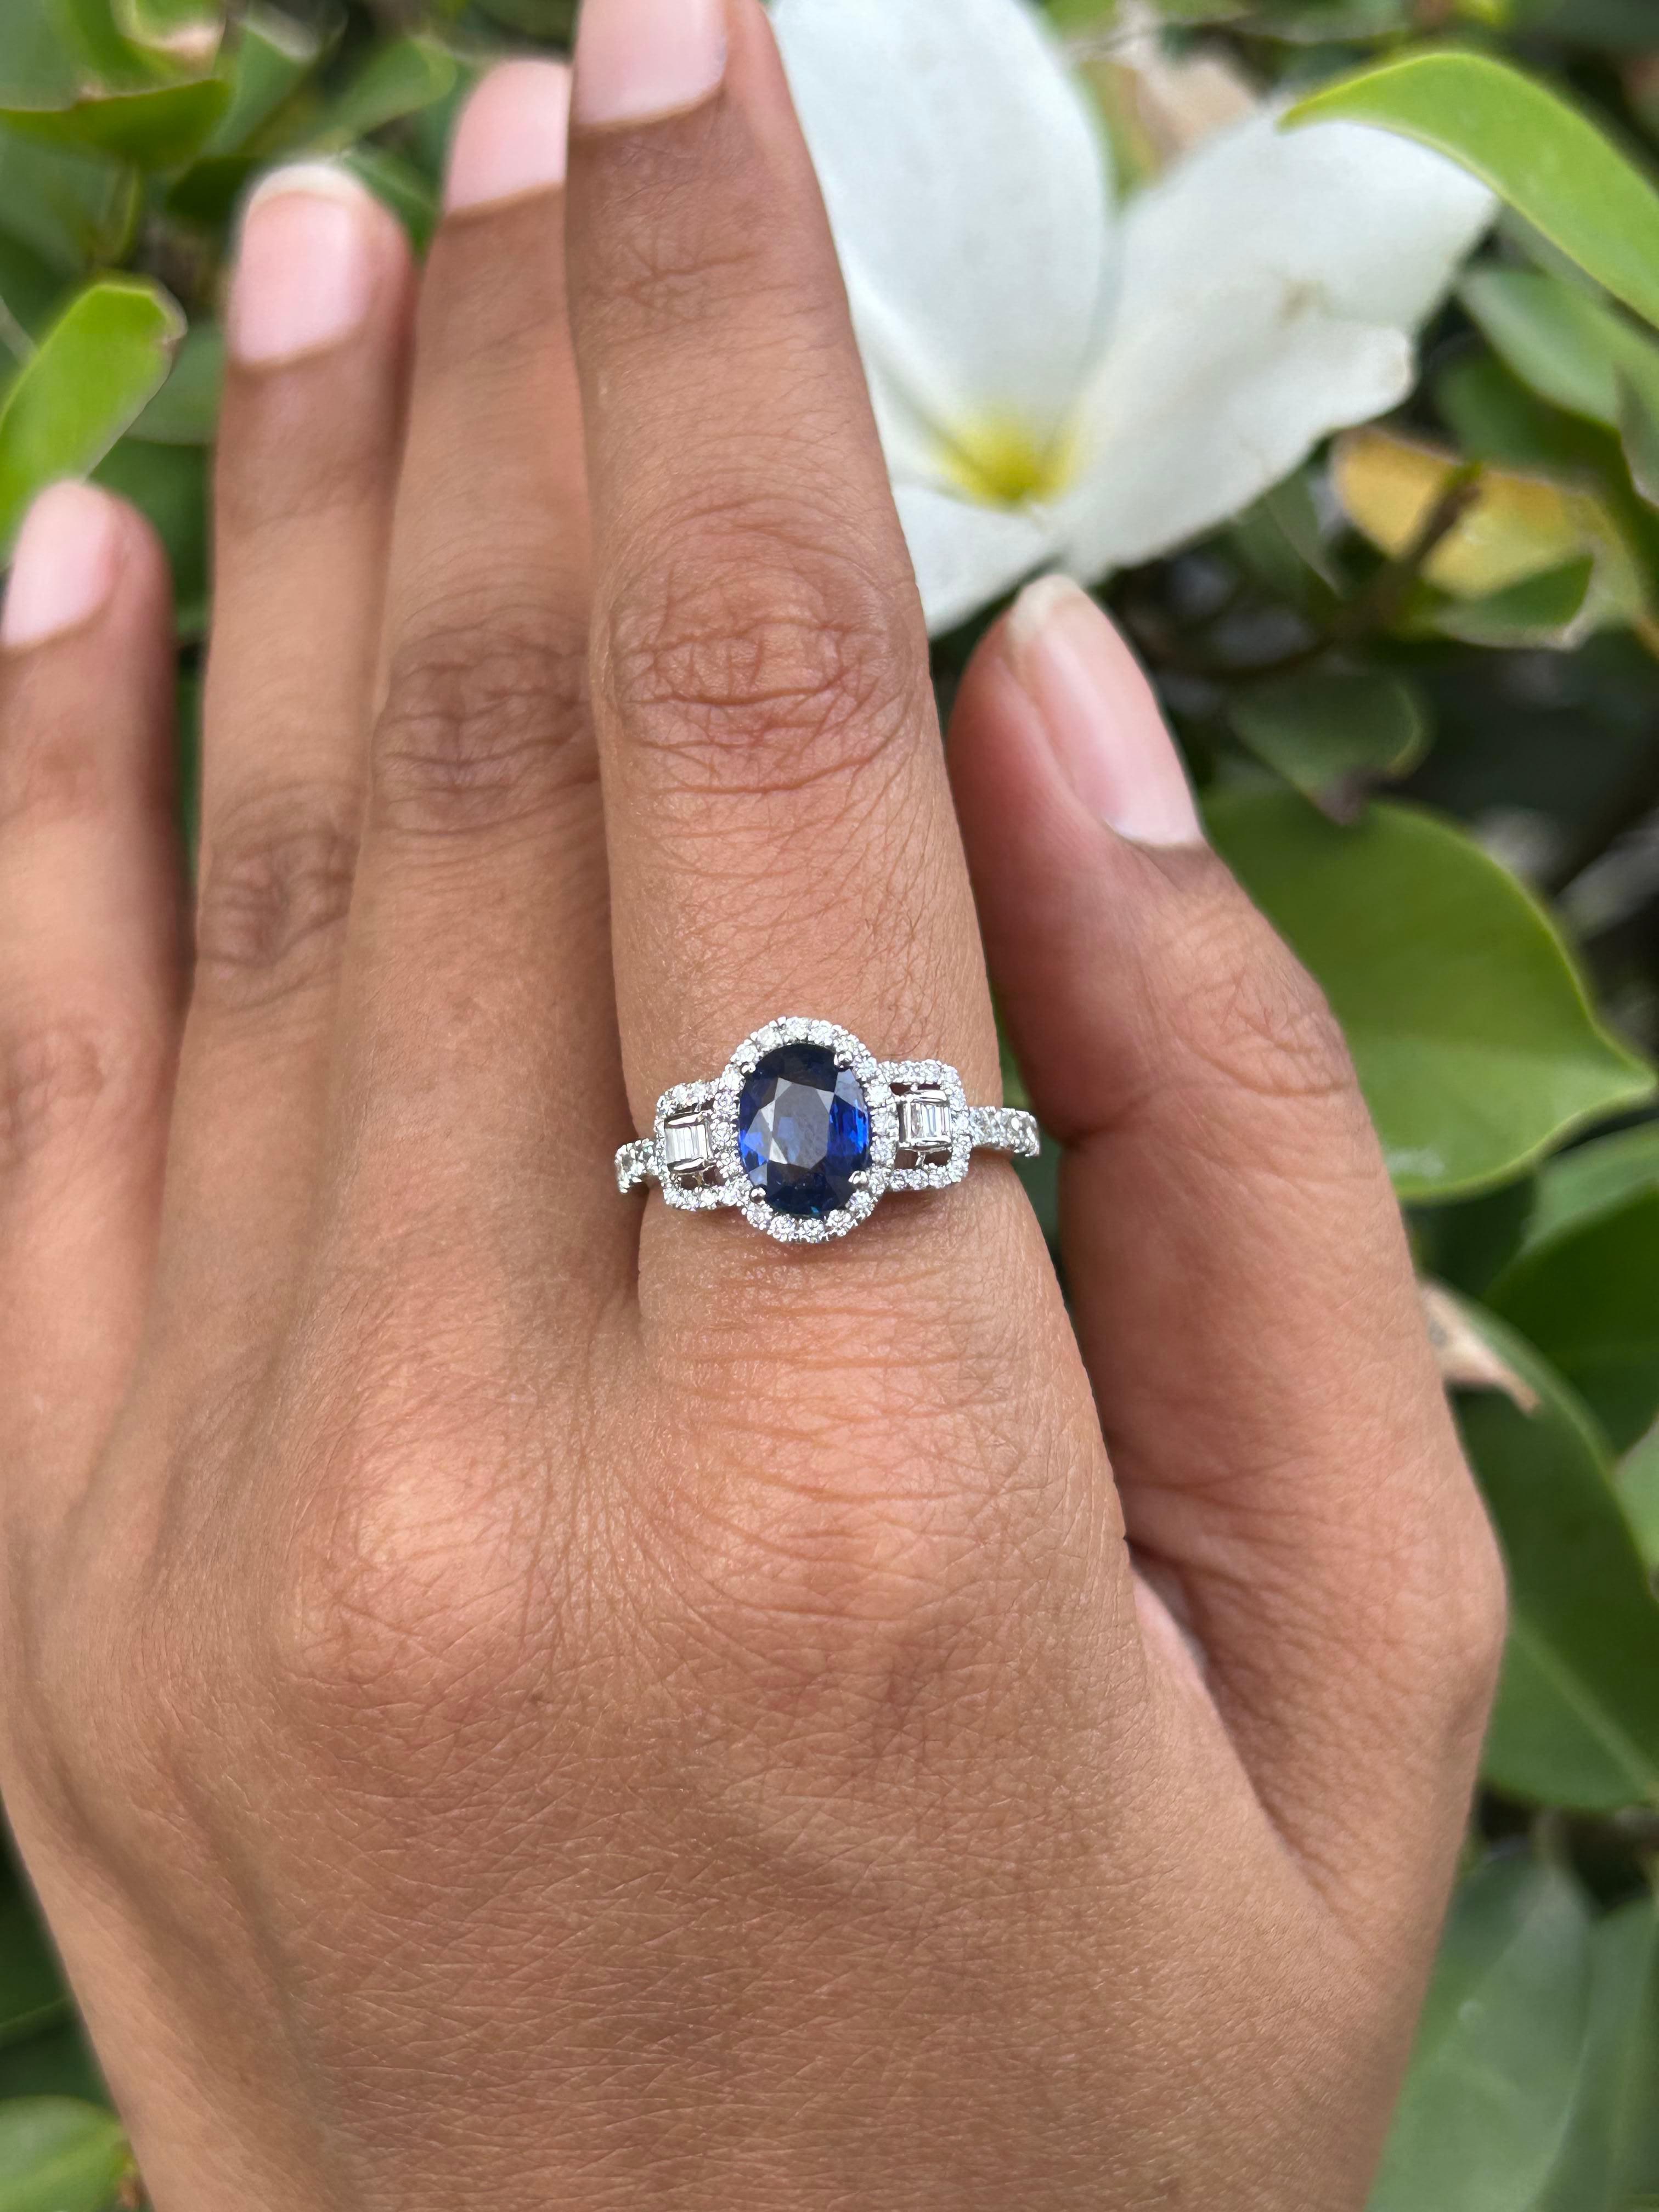 For Sale:  18k Solid White Gold Faceted Blue Sapphire Diamond Engagement Ring Certified 2